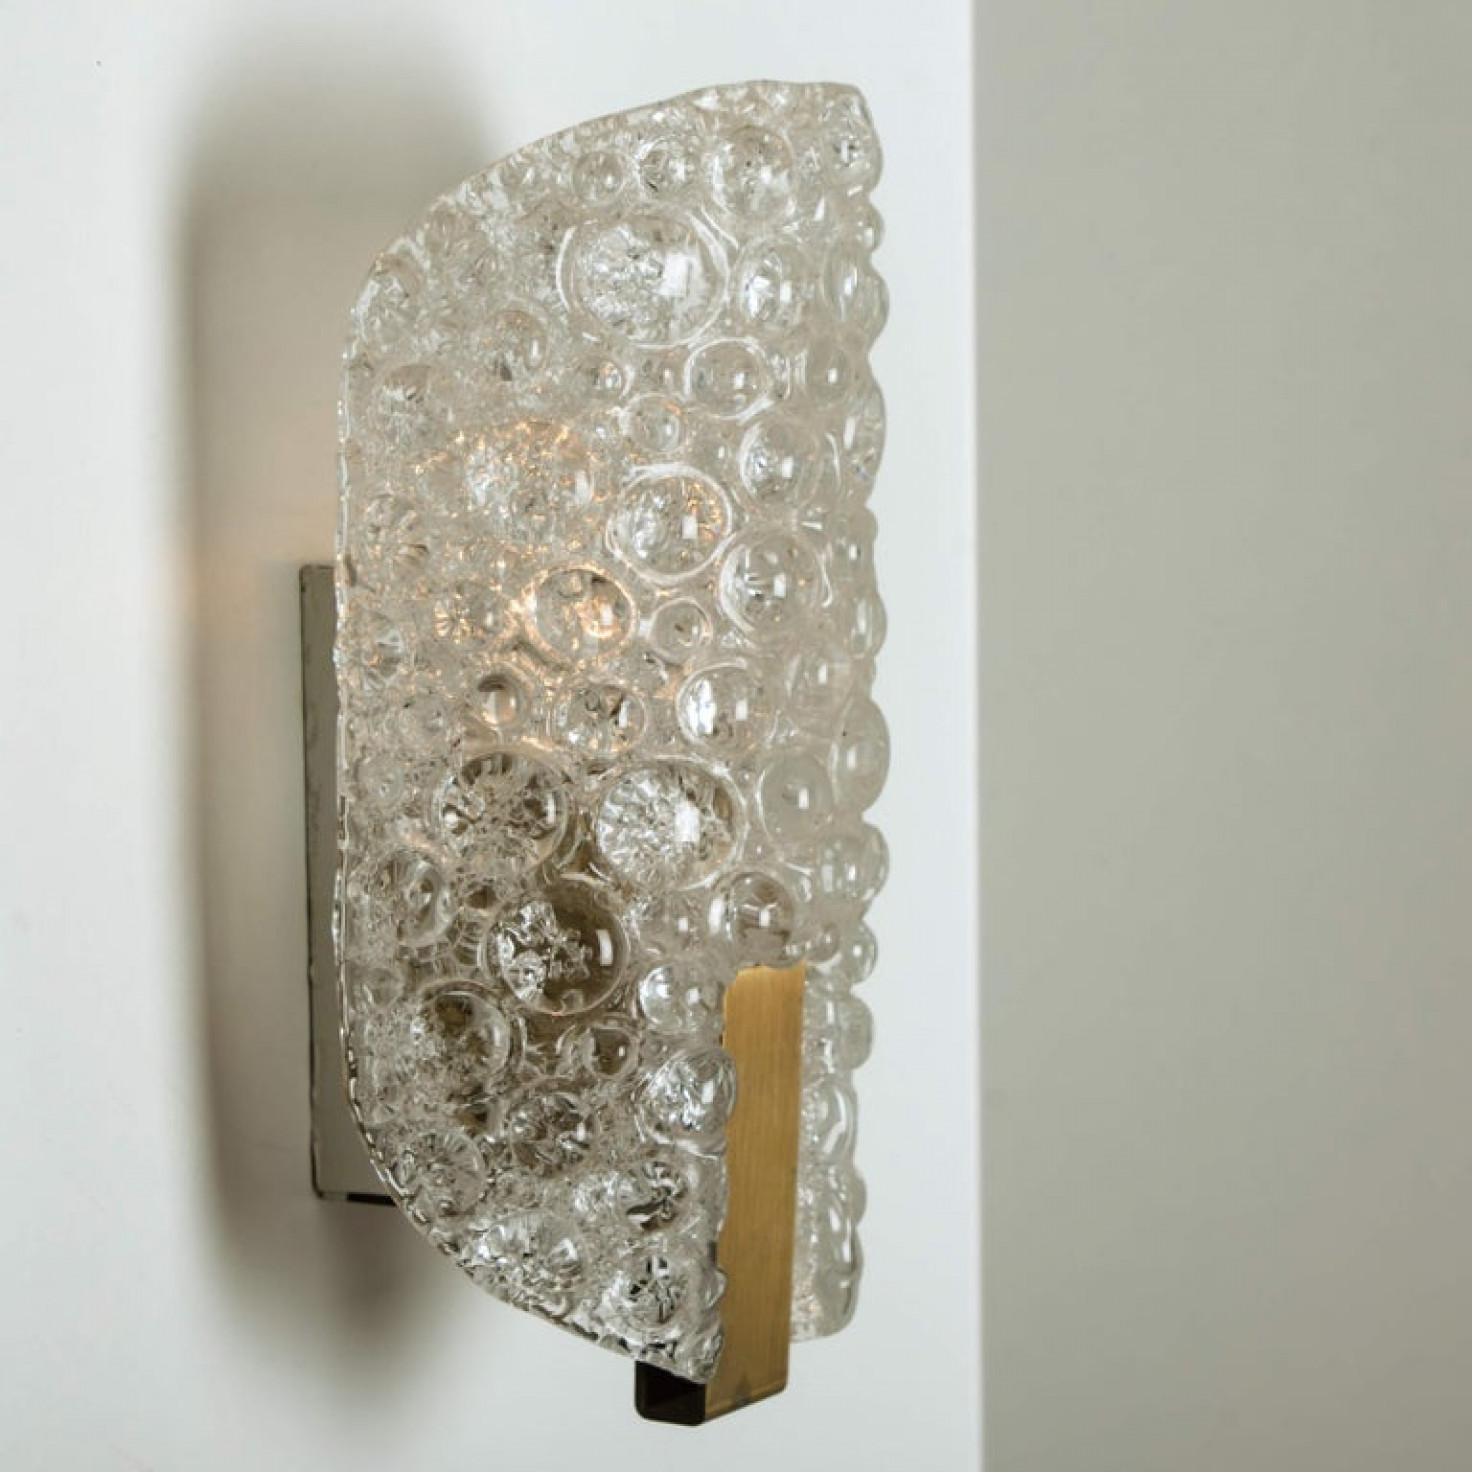 1 of the 4 Hillebrand Massive Murano Wall Light Fixtures, 1960 For Sale 2